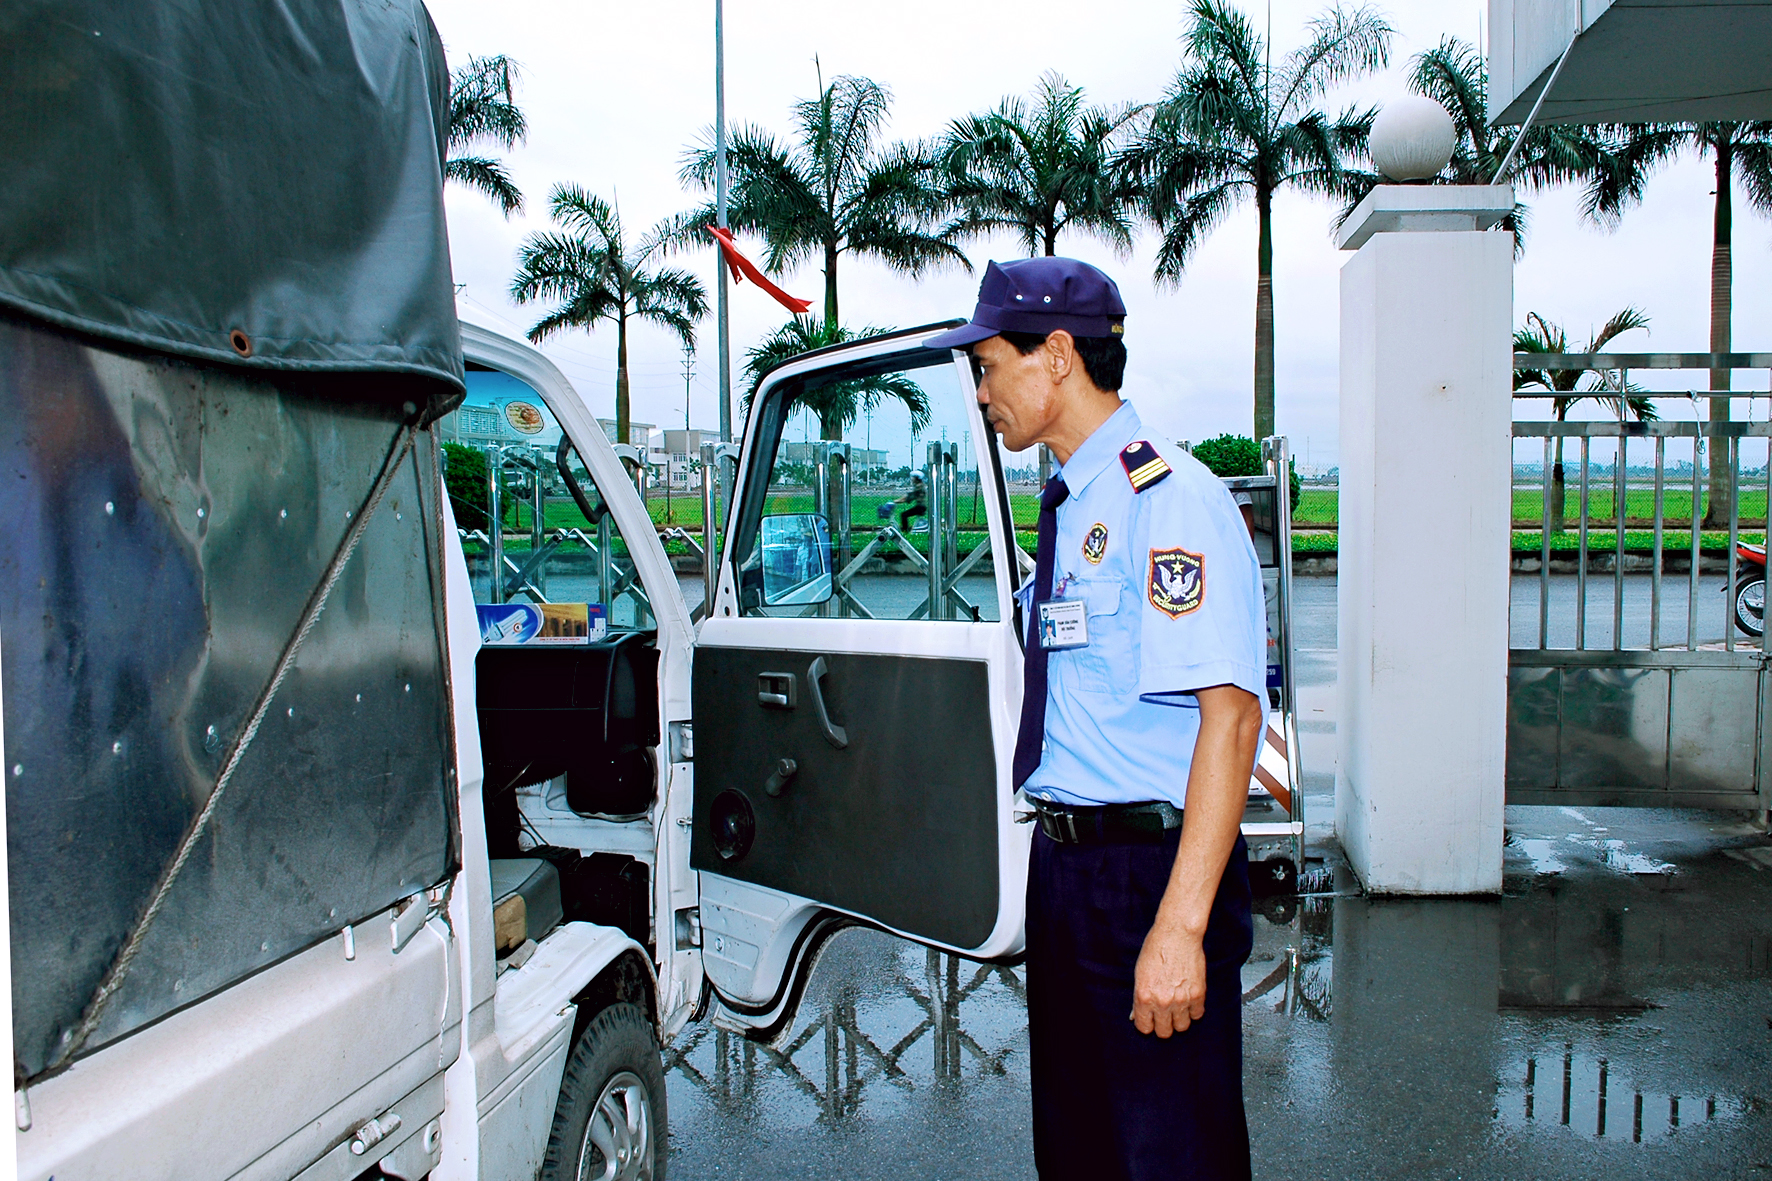 protection of escorts, escort services protect goods